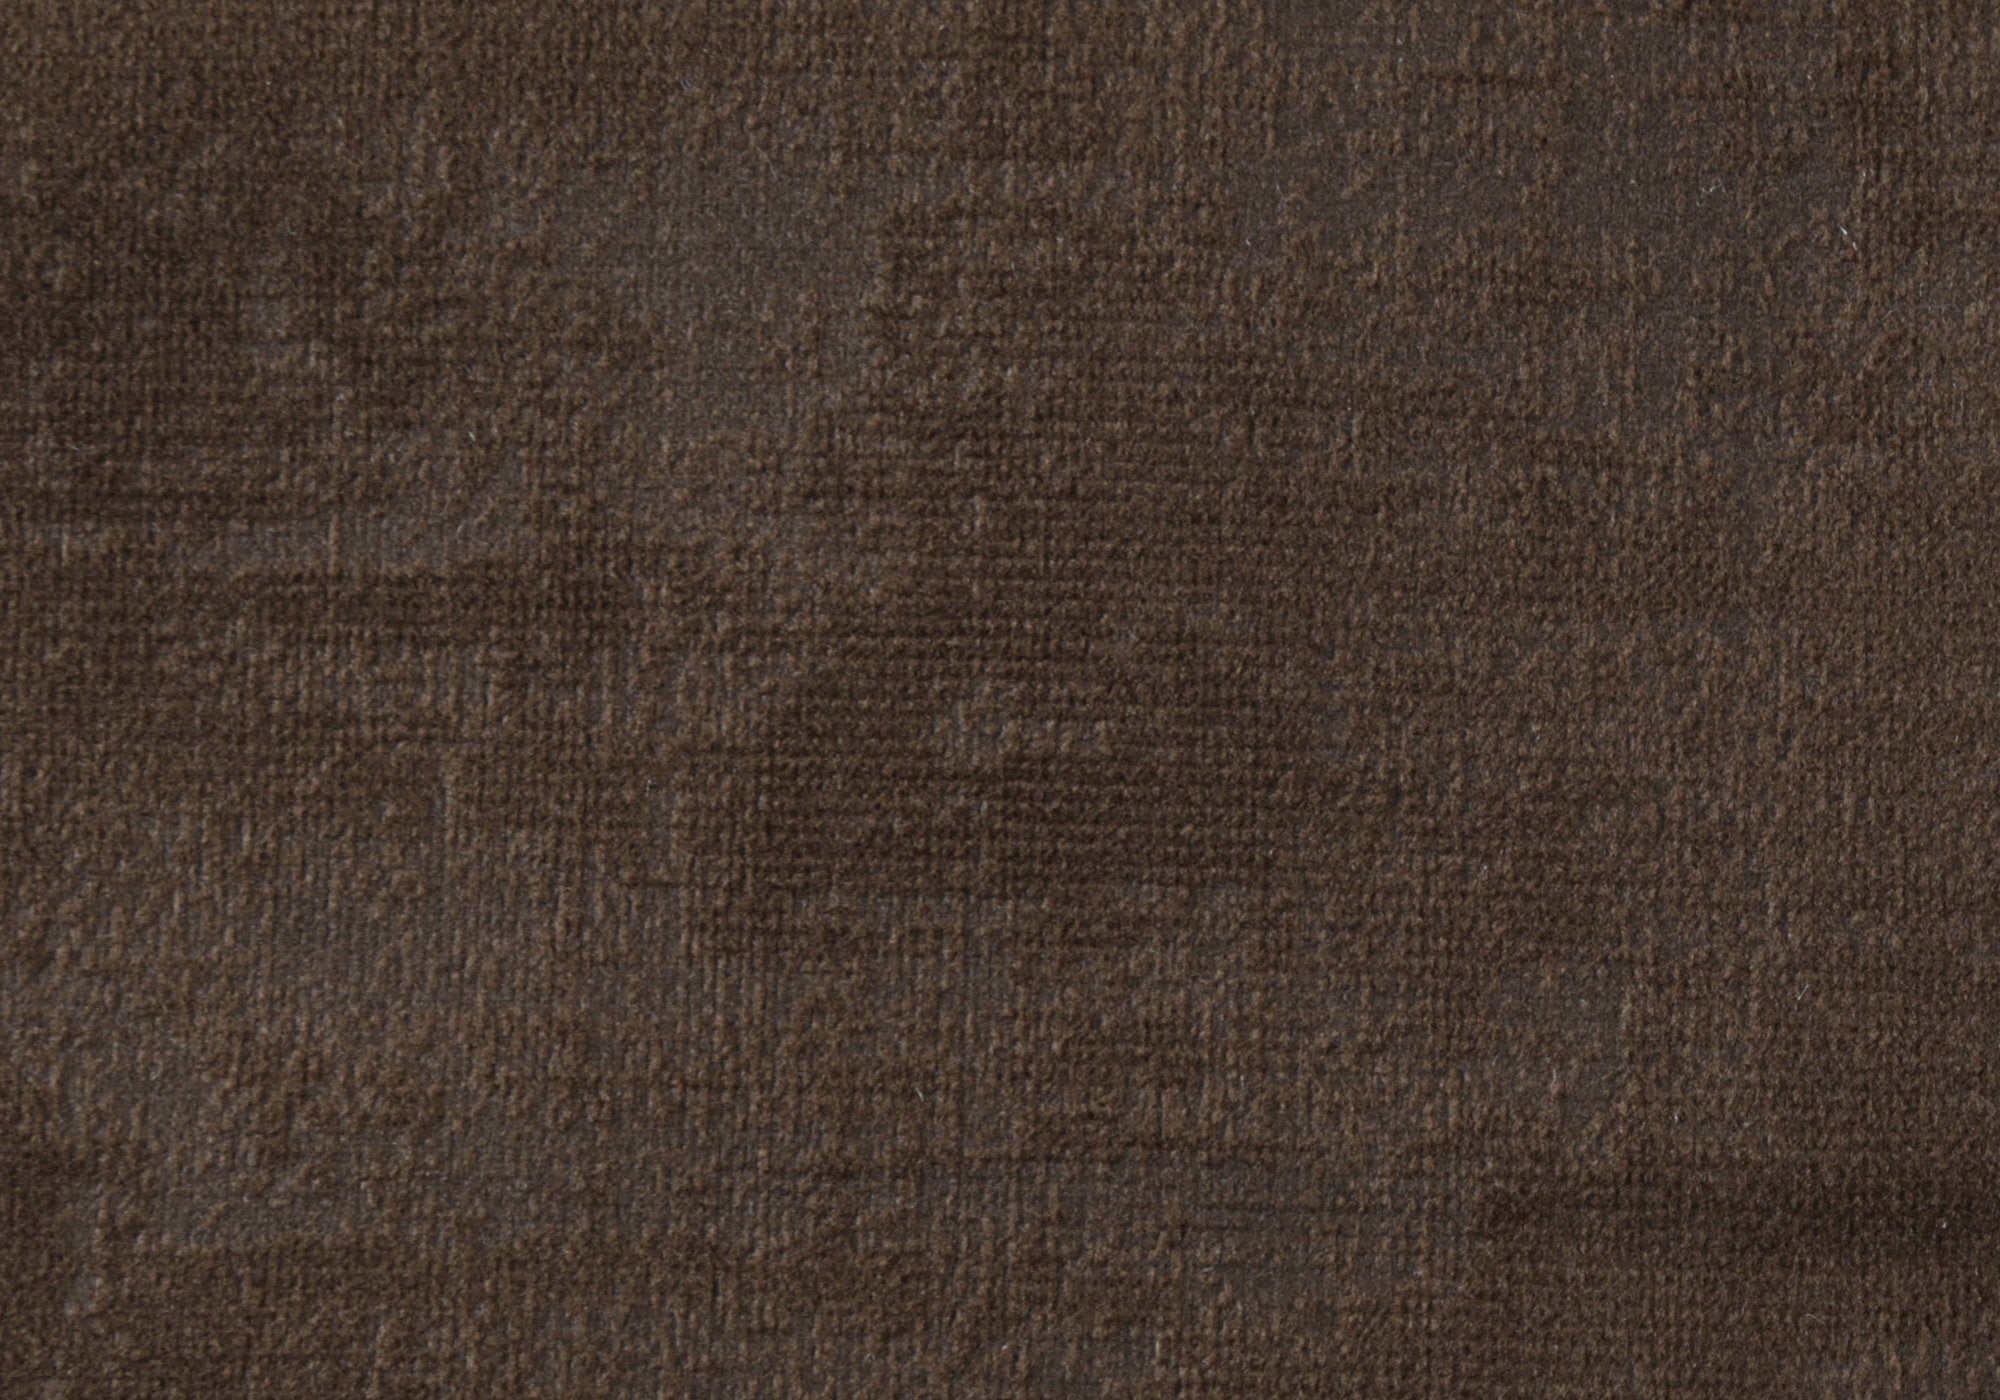 Accent Chair - Brown Brushed Velvet Fabric